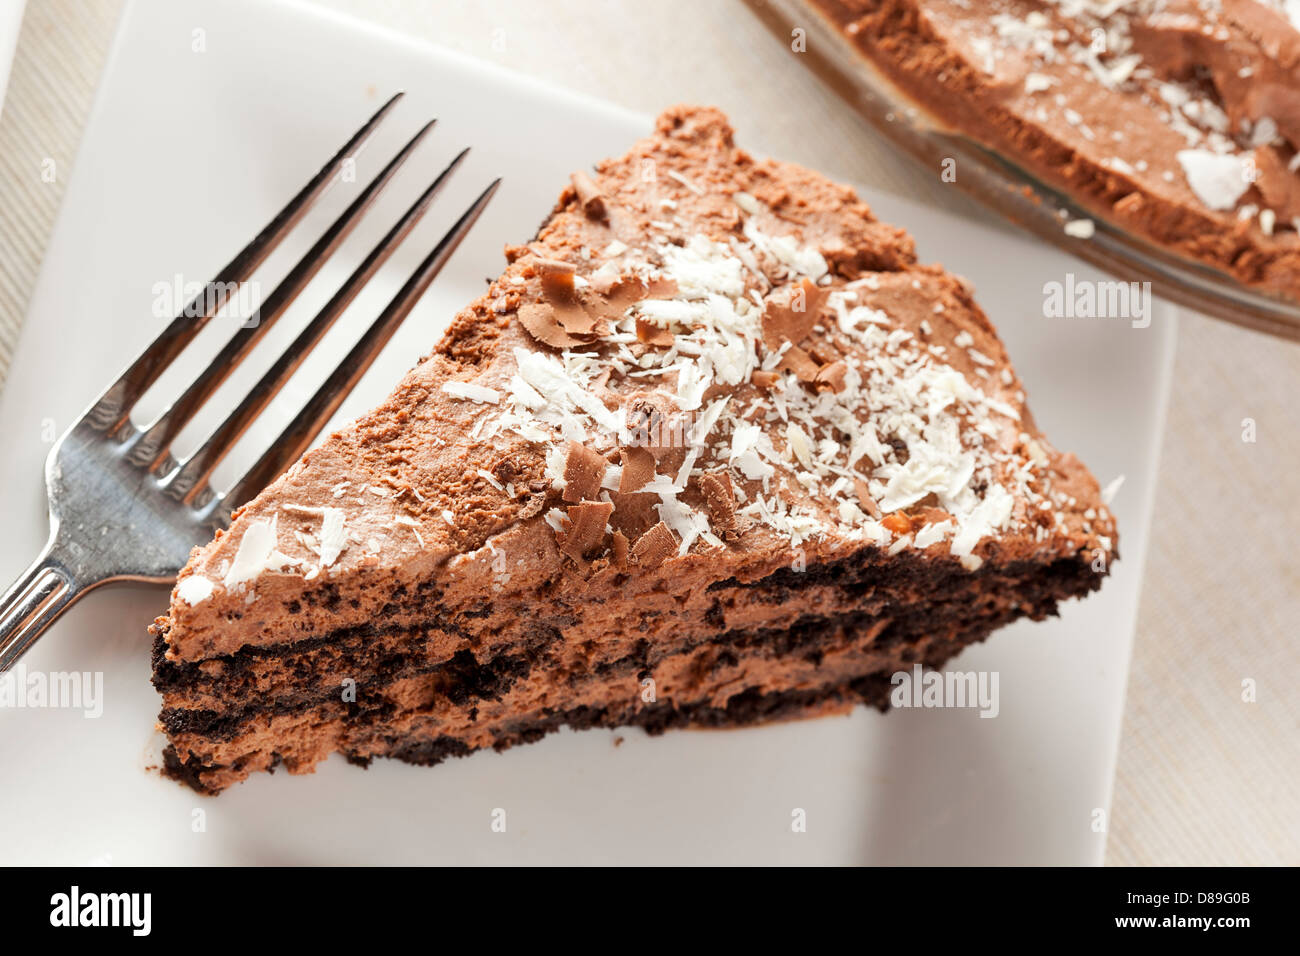 Rich Homemade Chocolate Pie against a background Stock Photo